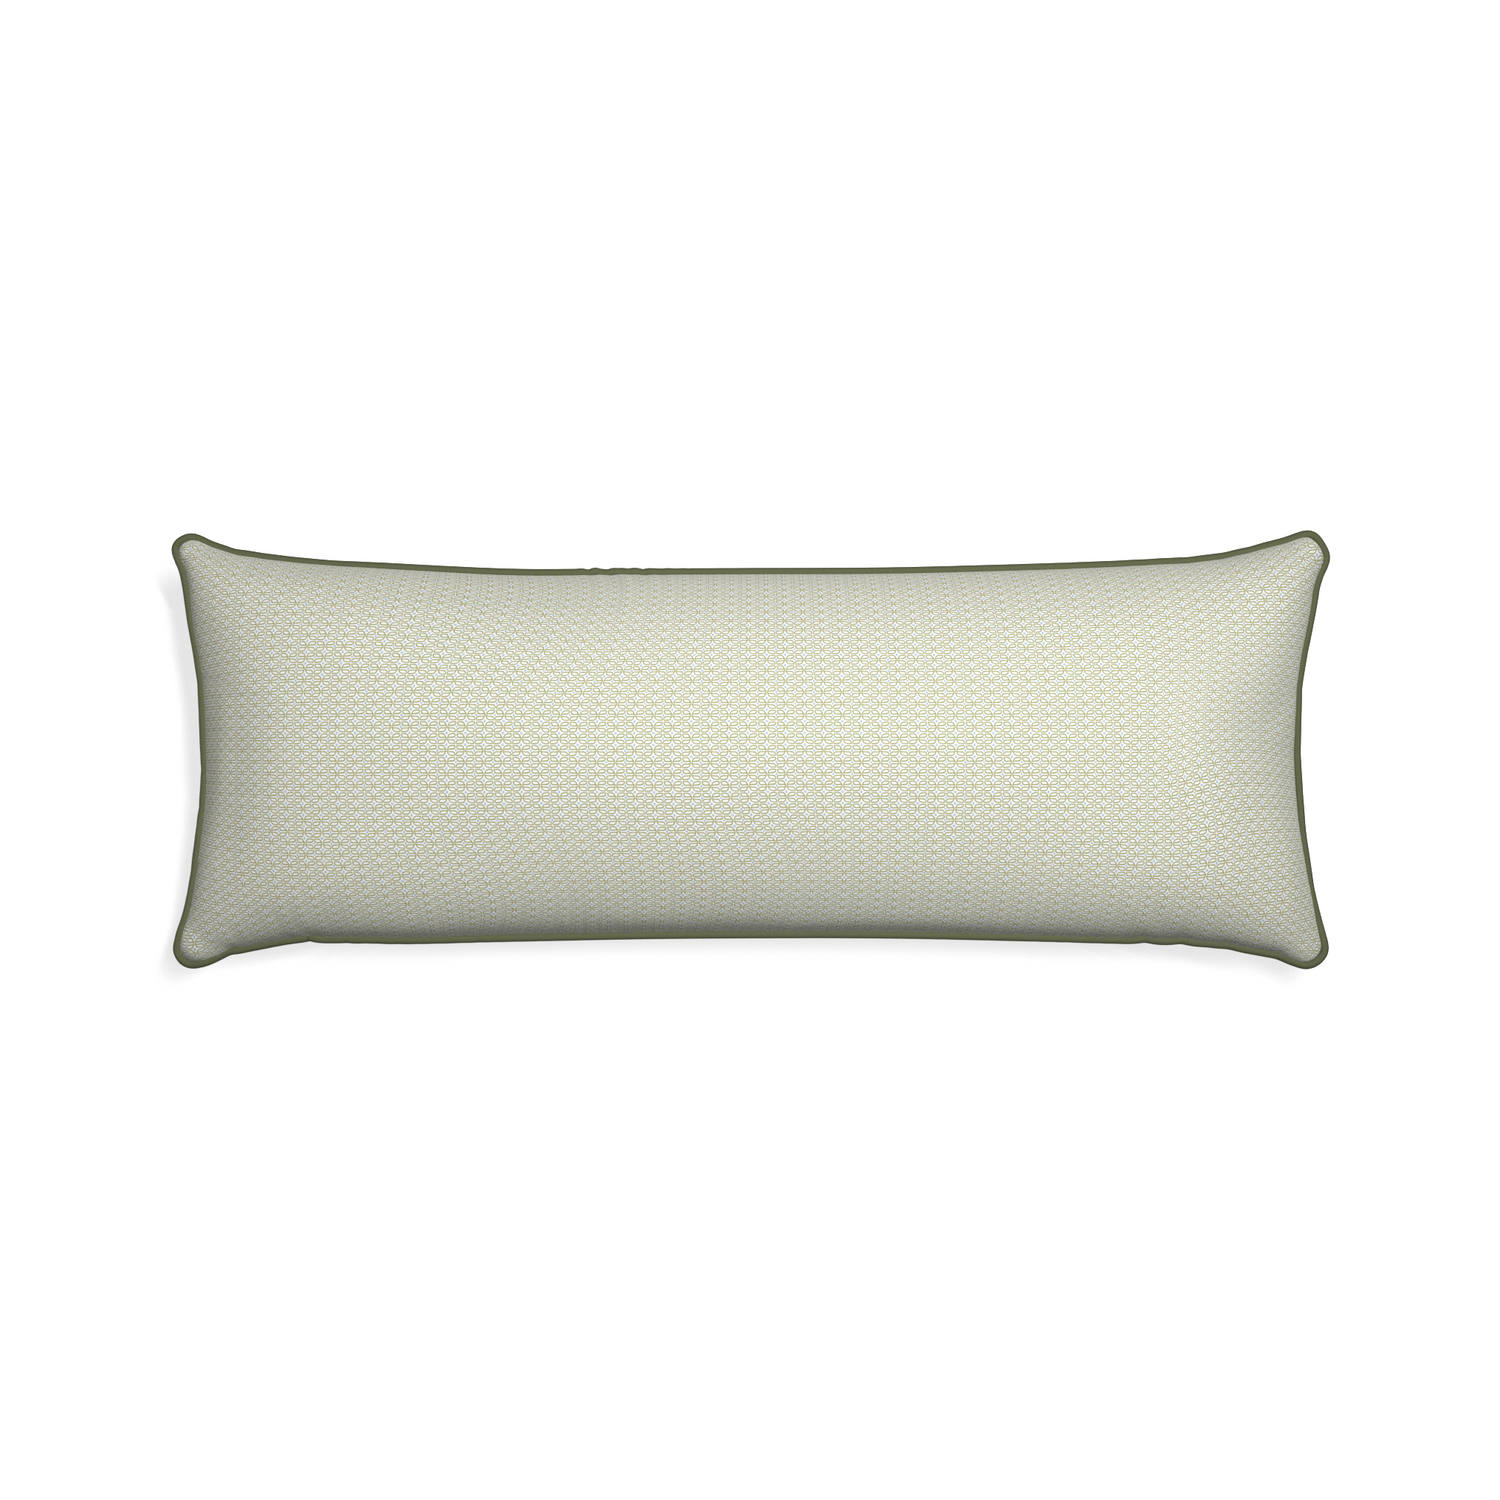 Xl-lumbar loomi moss custom pillow with f piping on white background